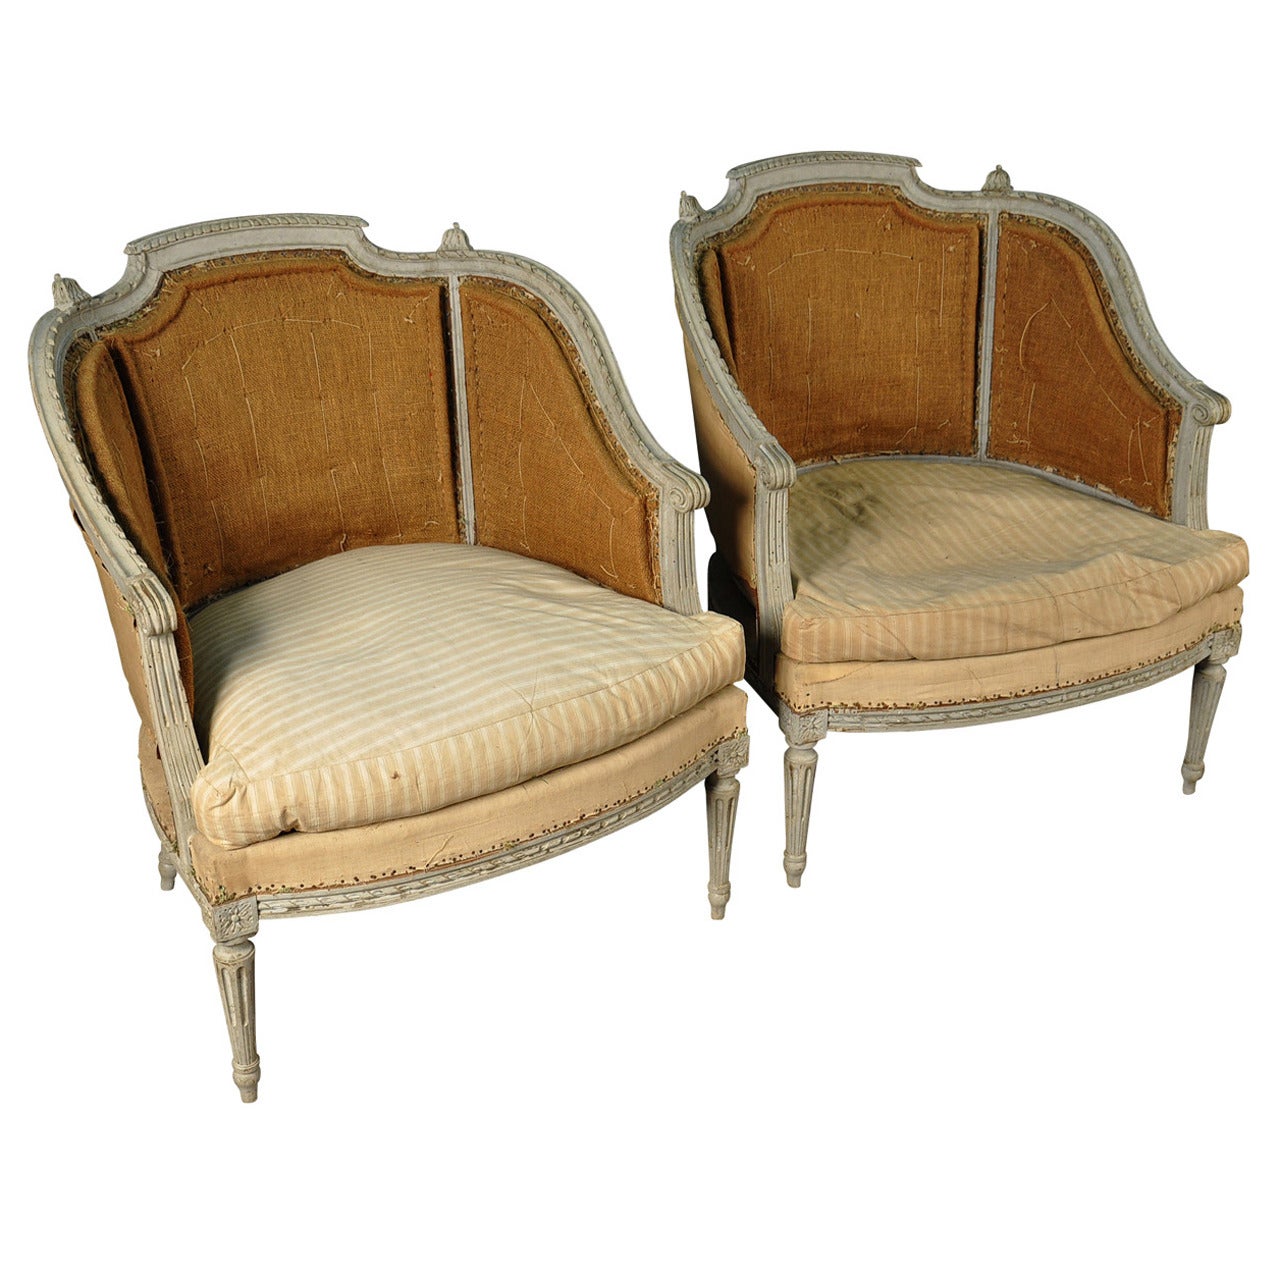 Pair of French 19th Century Louis XVI Style Marquises Bergeres